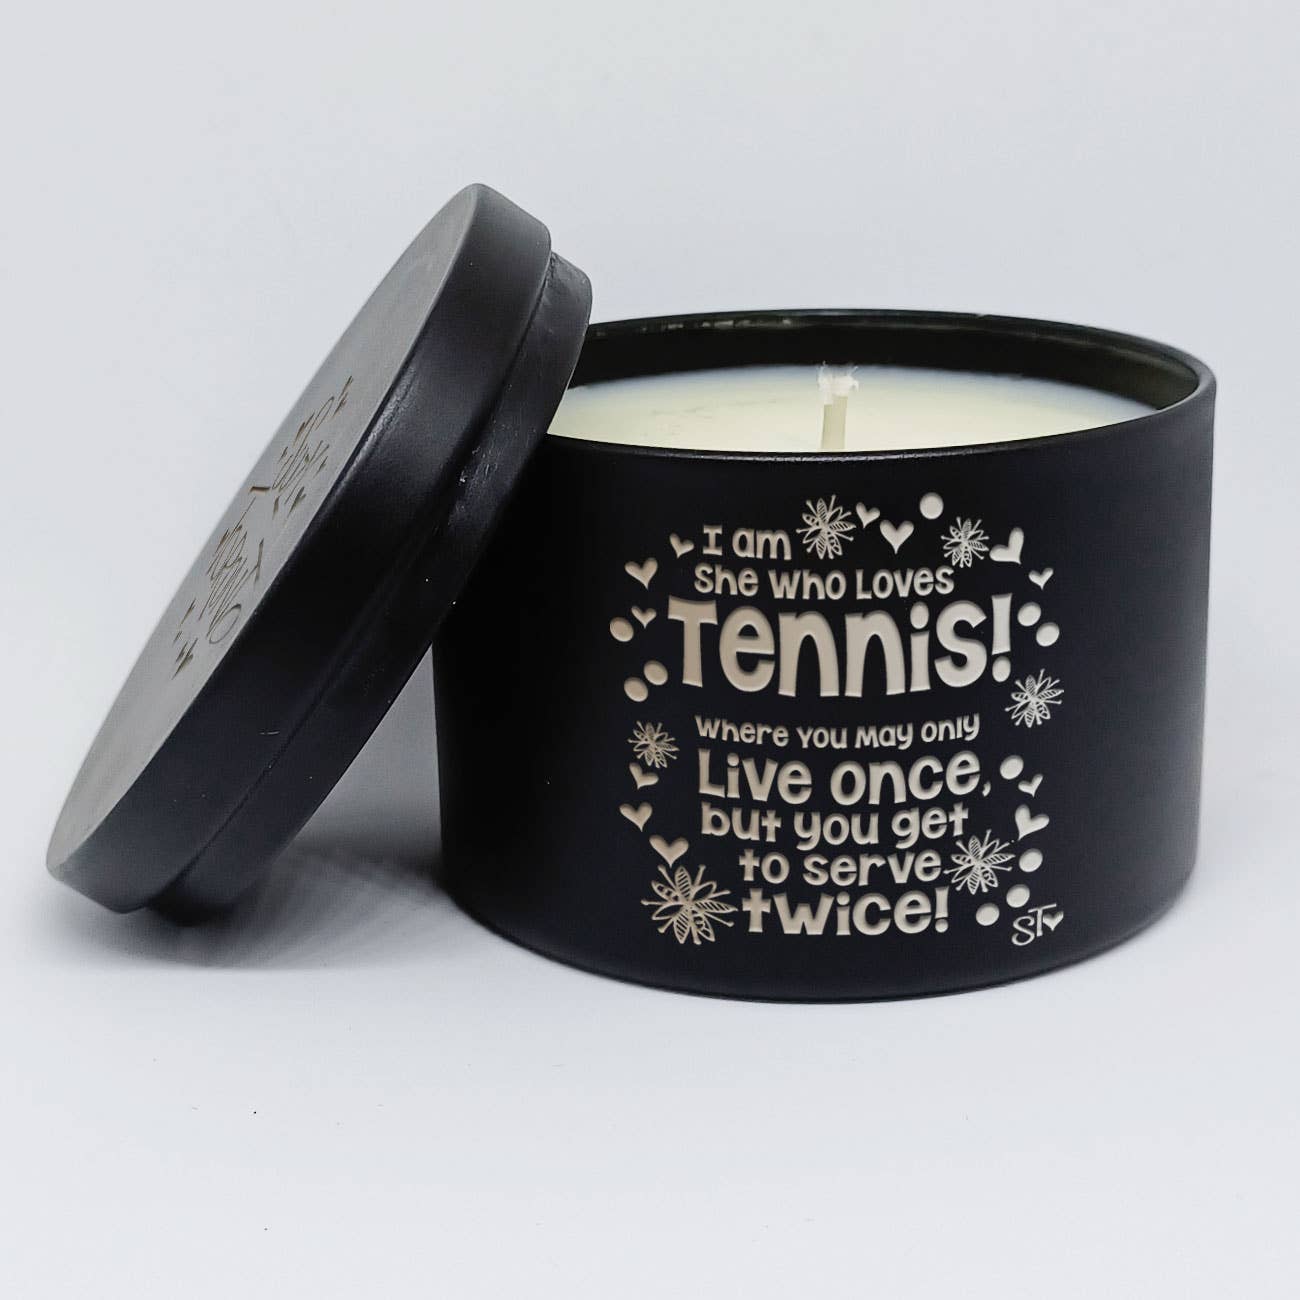 She Who Loves Tennis: Vanilla Candle